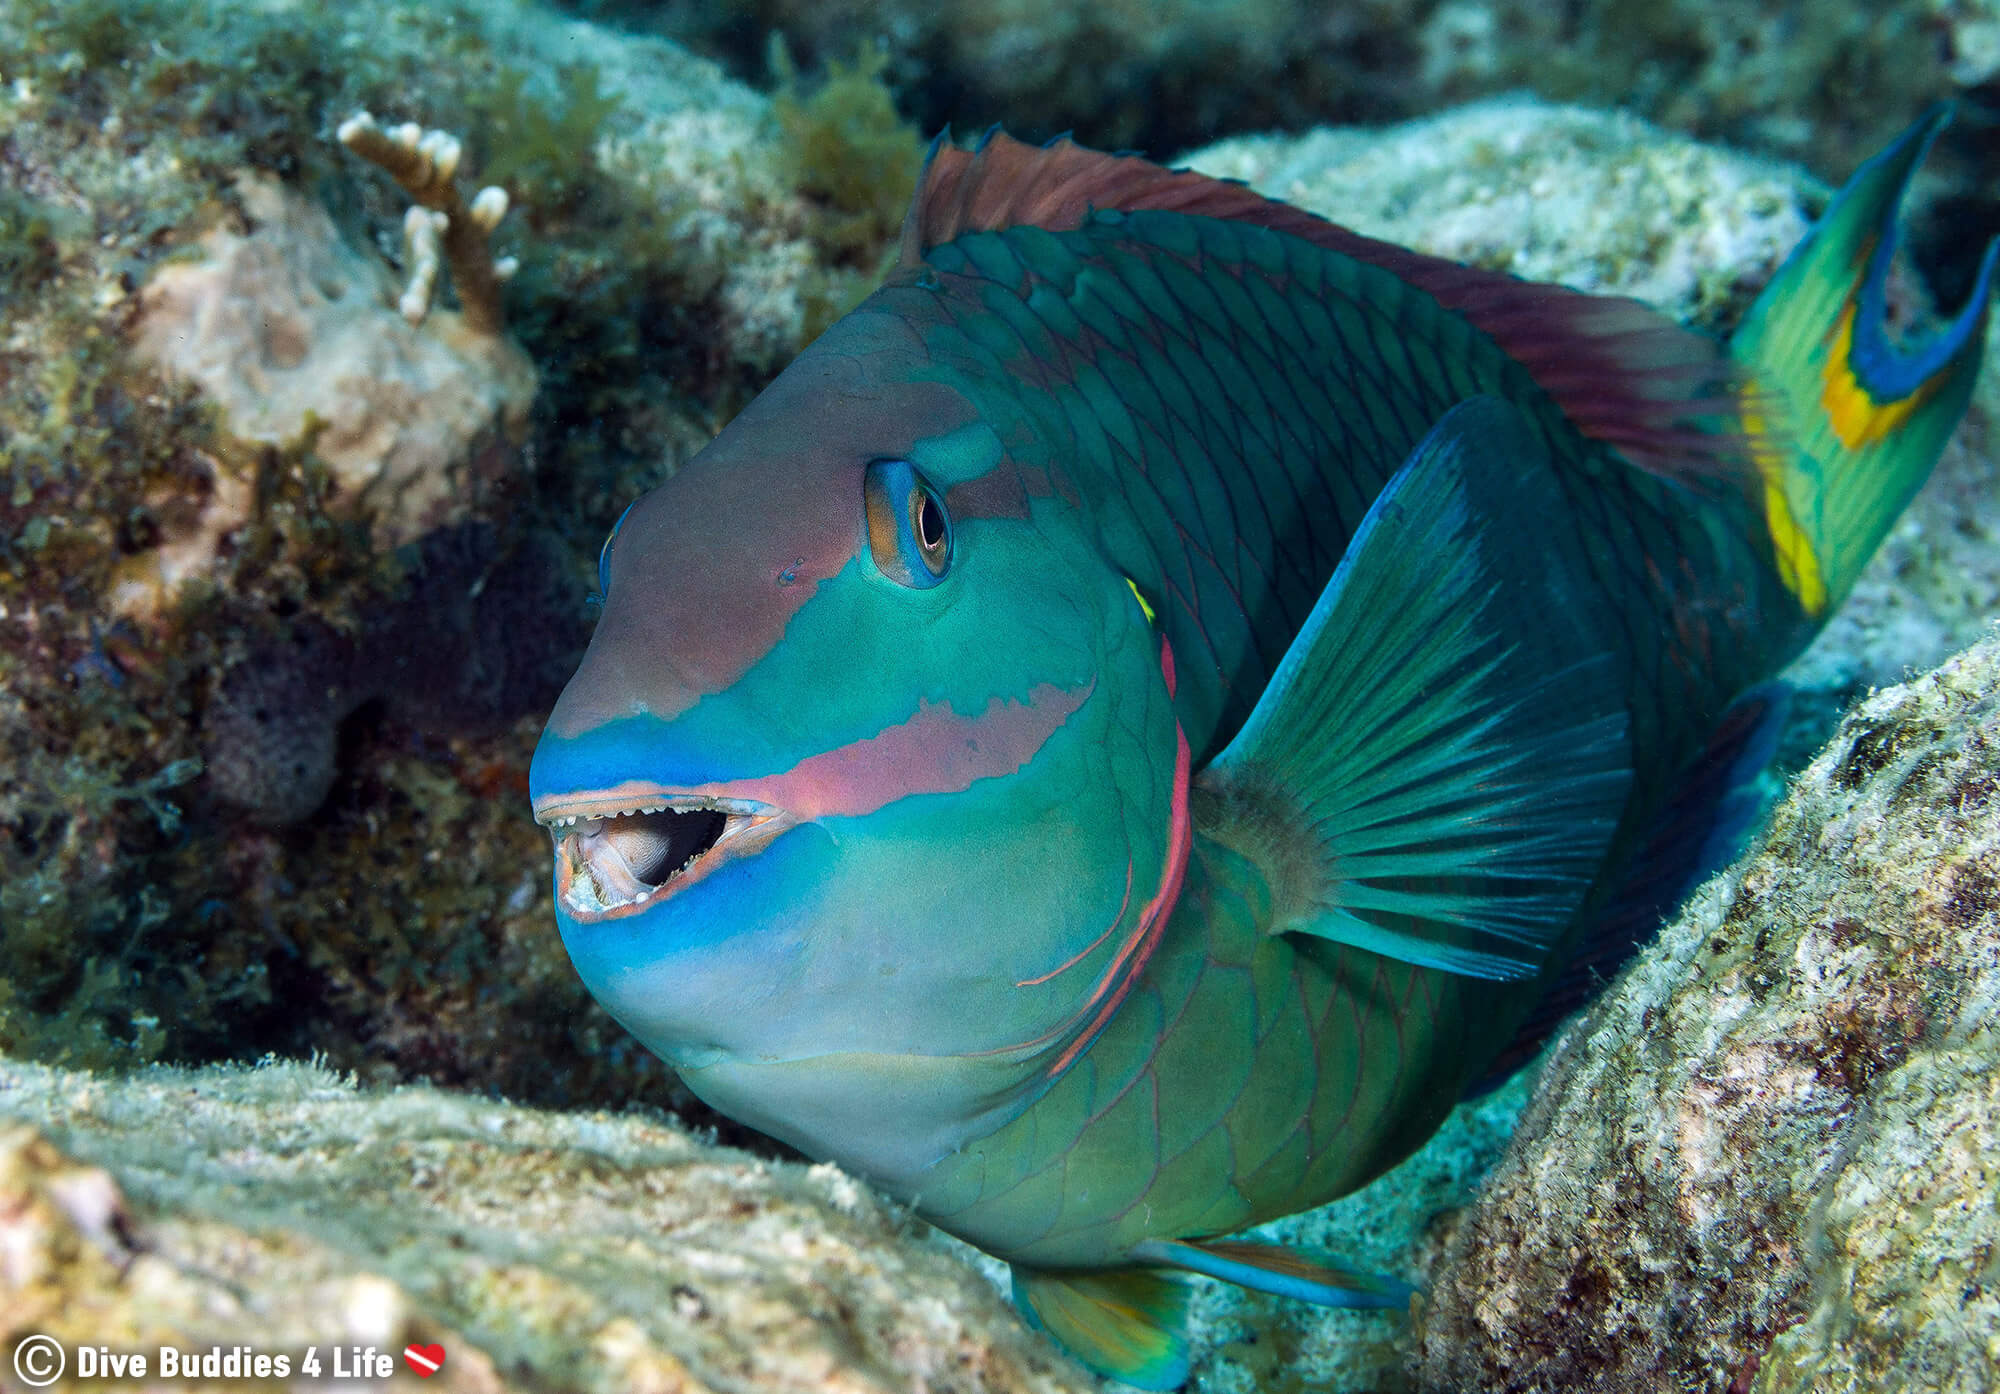 A Parrot Fish Smiling at a Scuba Diver While on the Reefs of Key Largo, Florida, USA